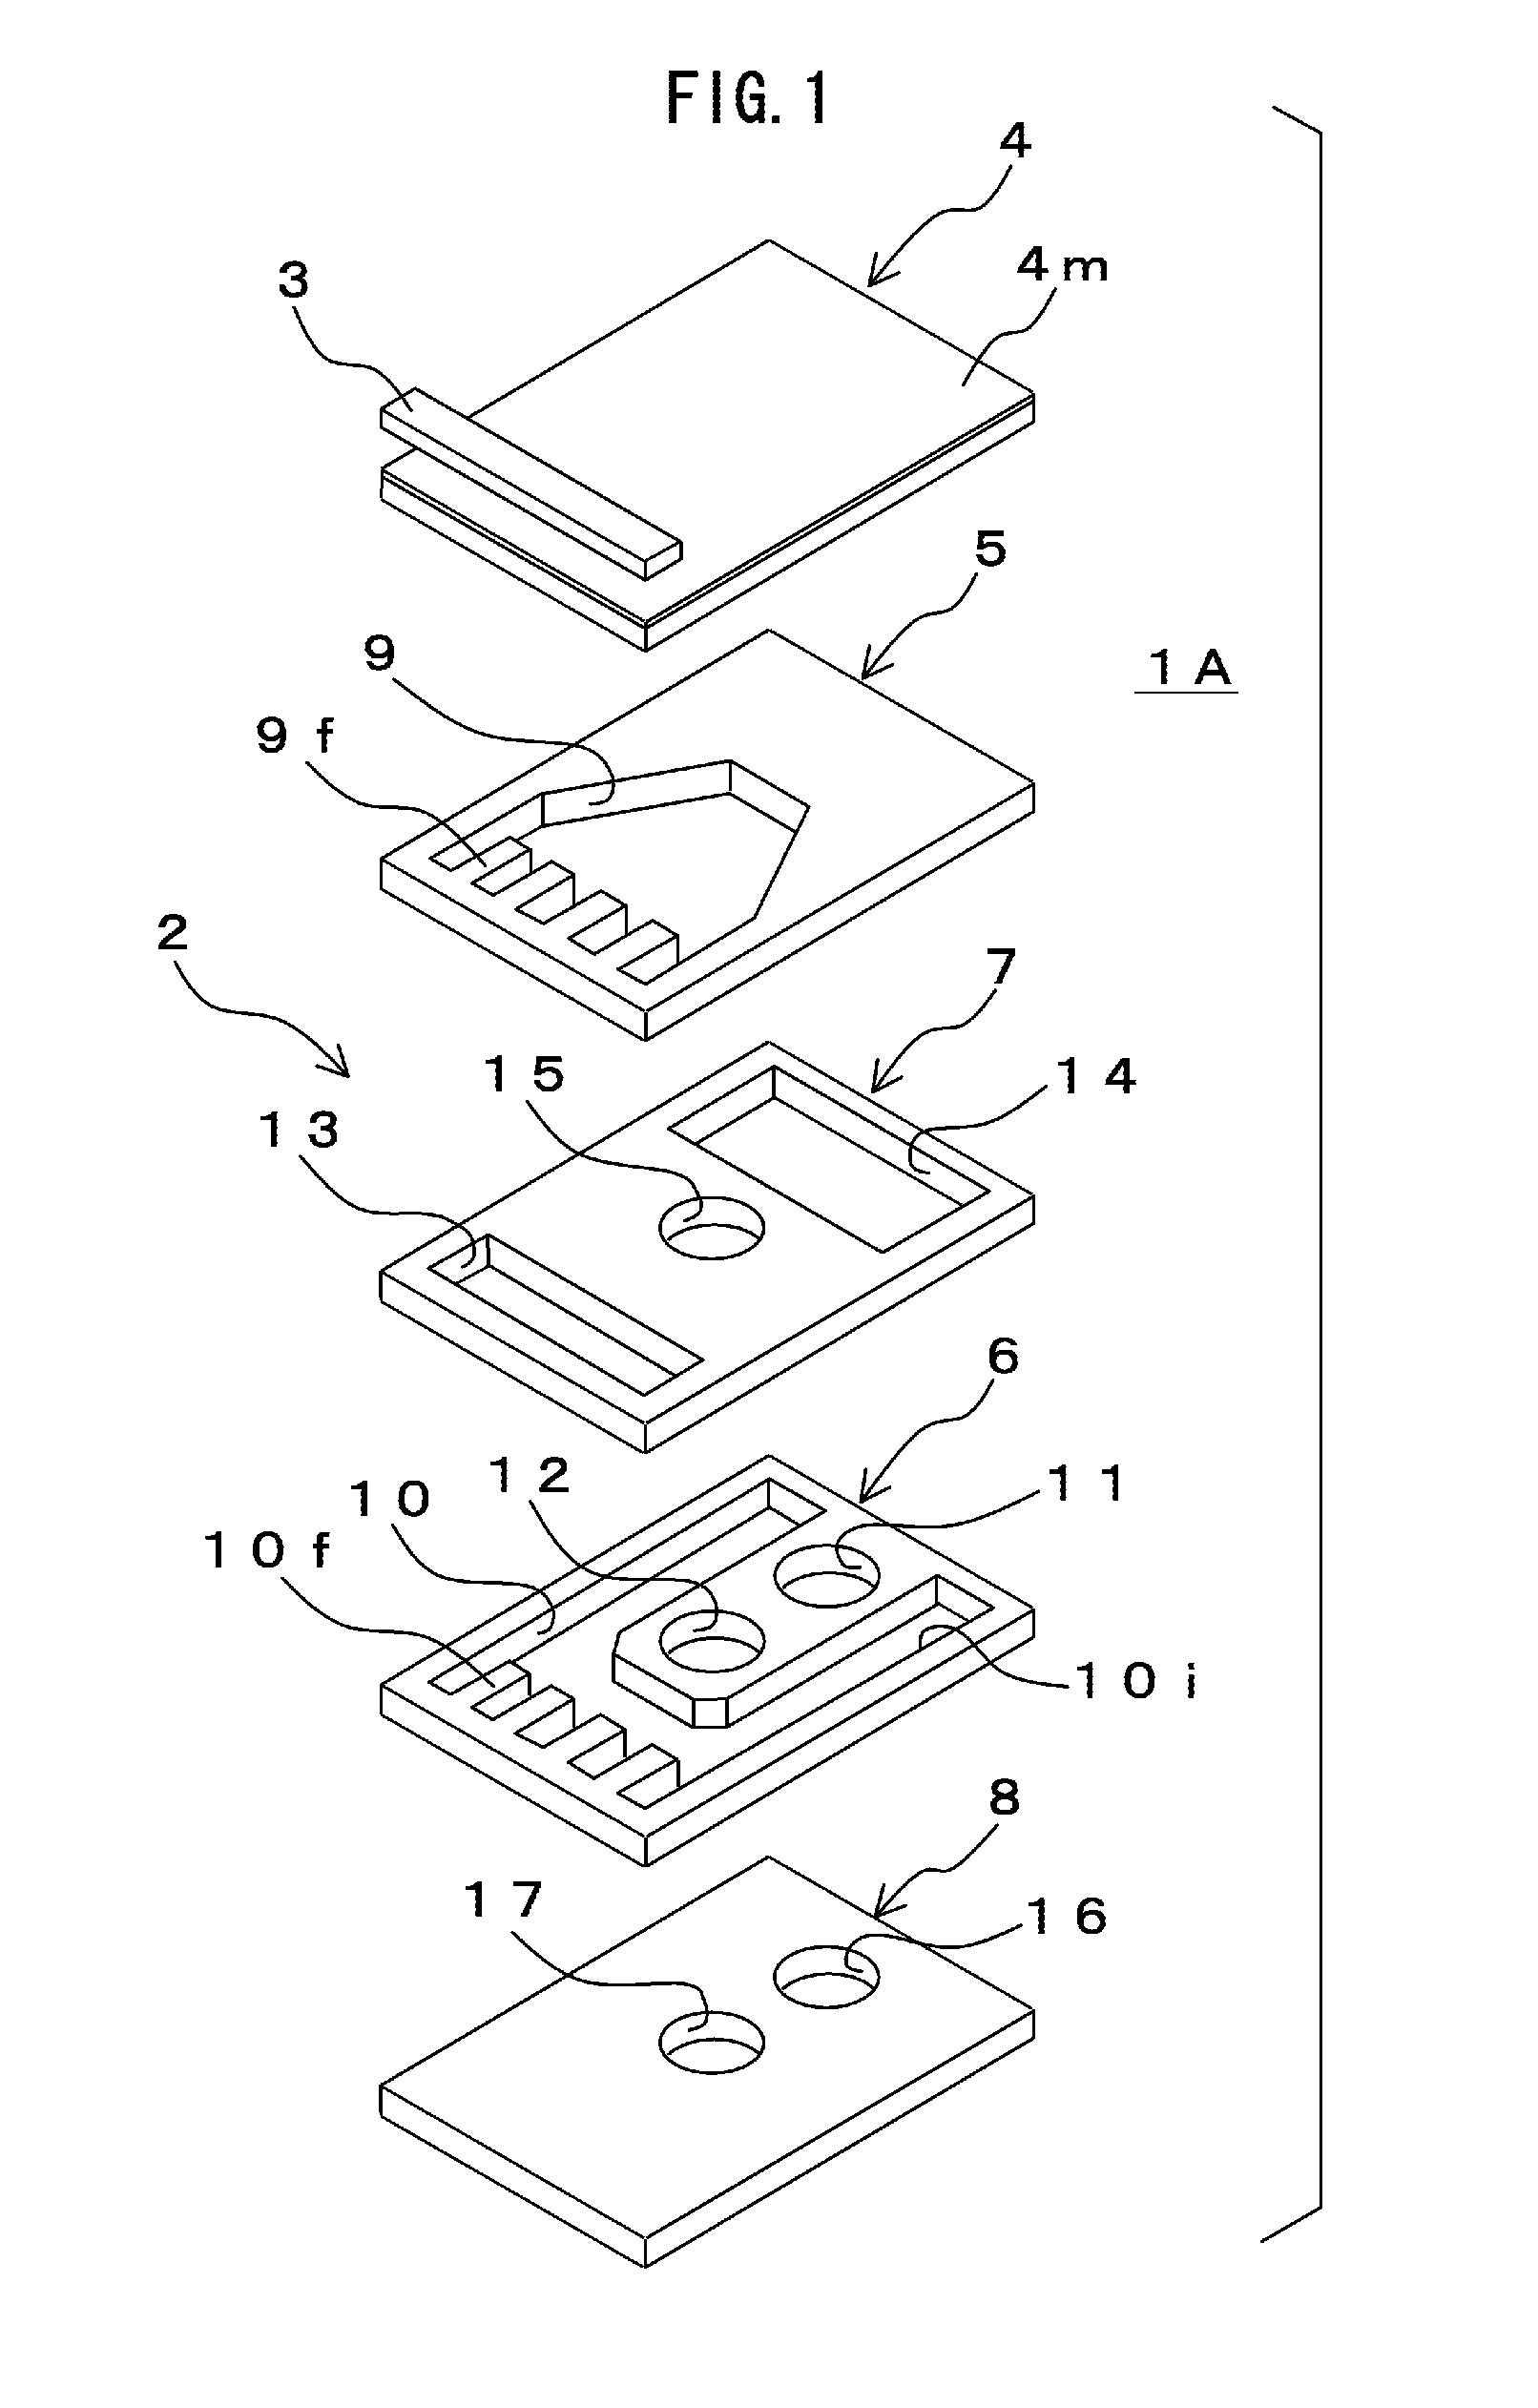 Semiconductor laser device and heat sink used therein